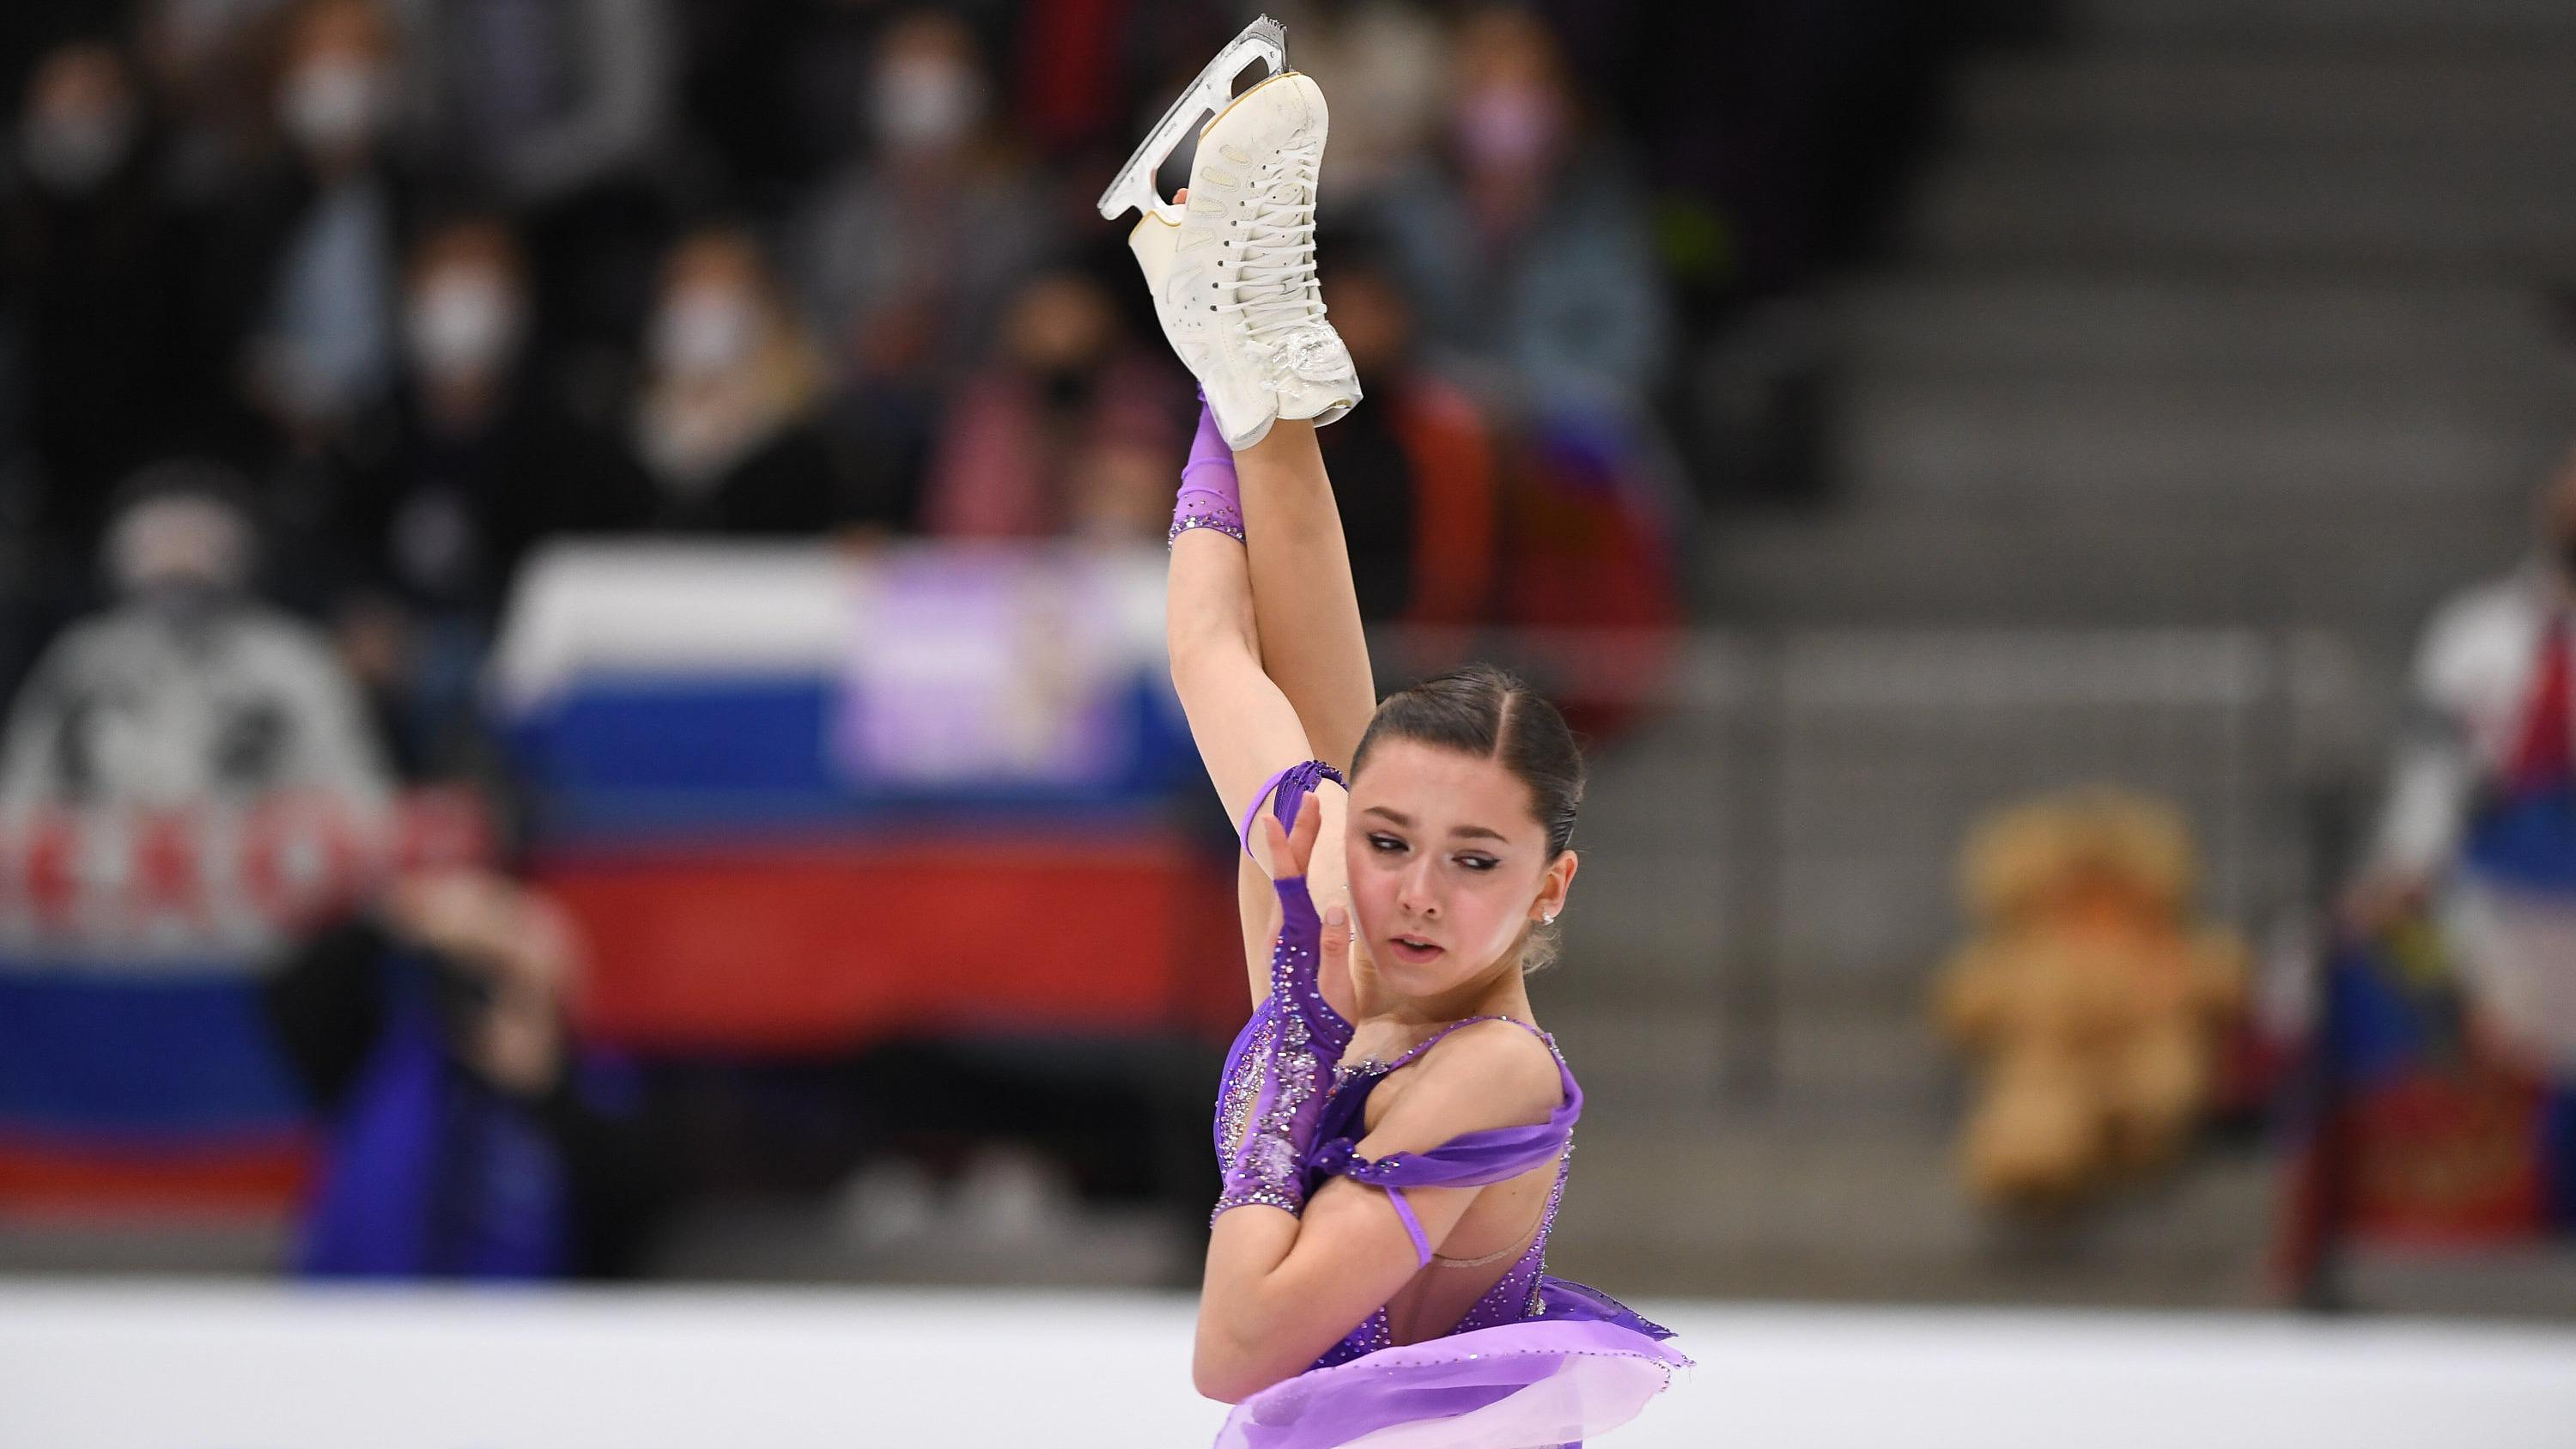 Doping: the CAS will make its decision for skater Kamila Valieva, tested positive at the Tokyo Olympics